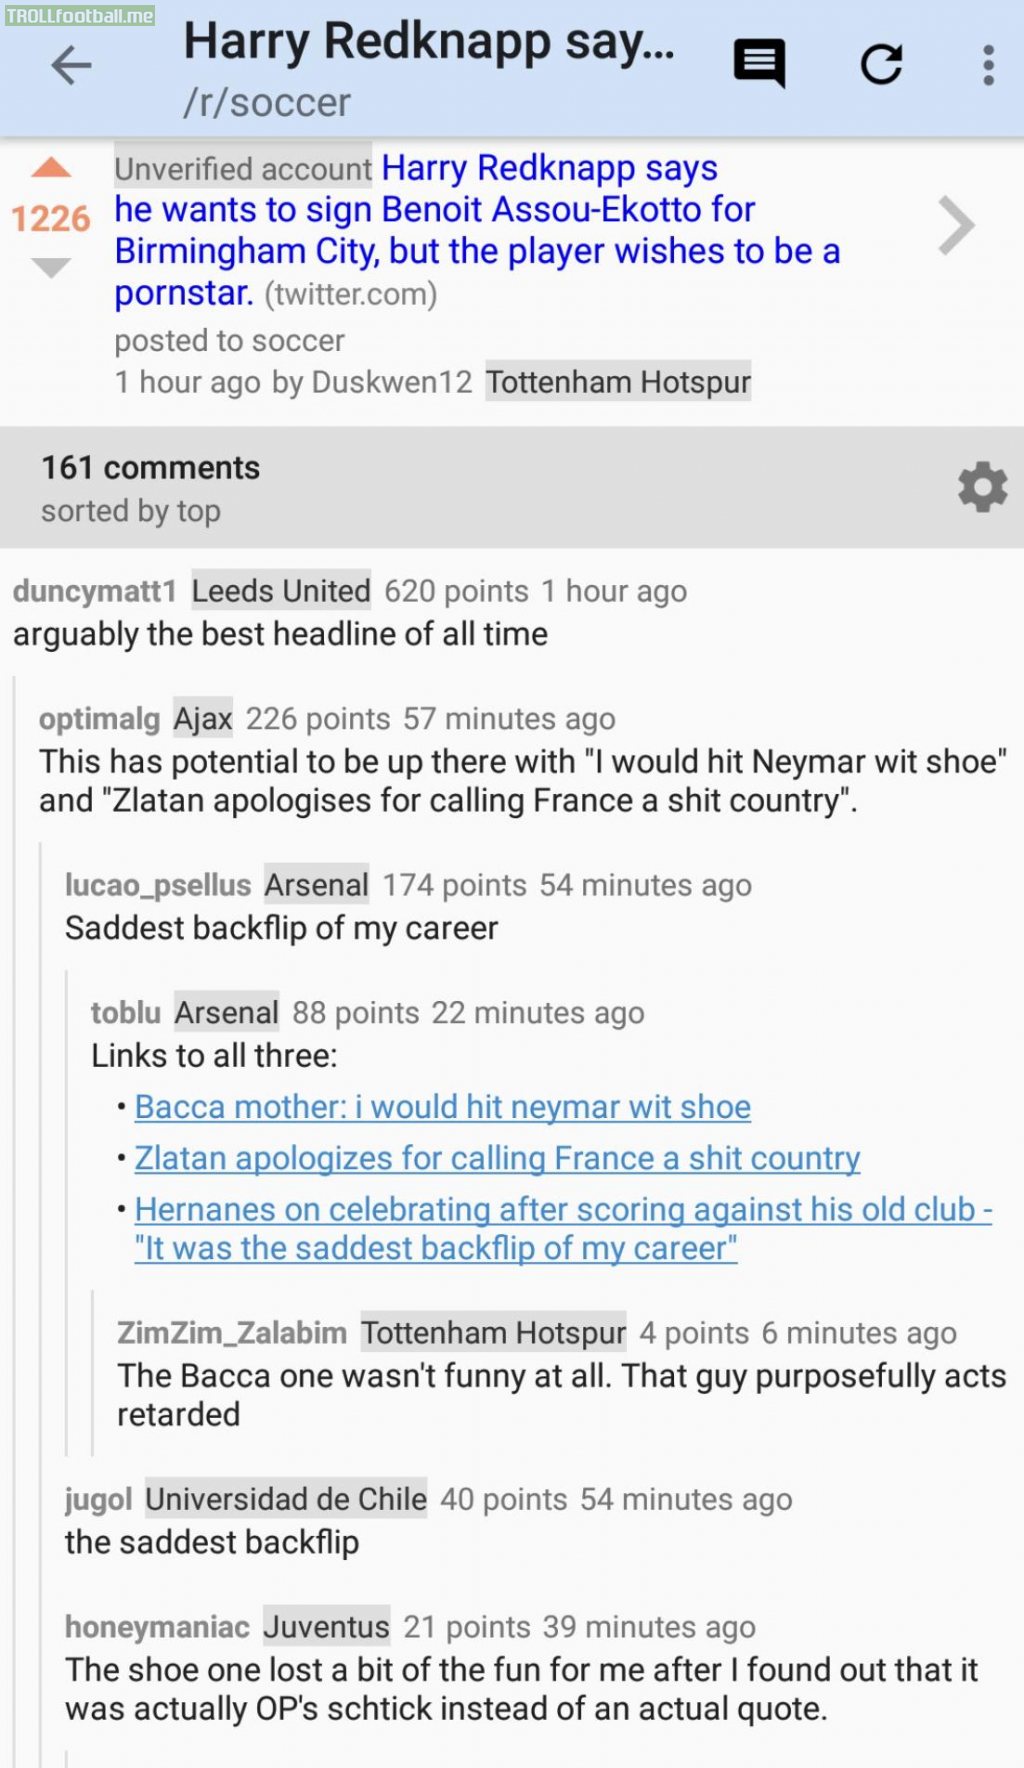 Found an old screenshot from when "the list" (r/soccer list) was only three entries long and there was no r/saddestbackflip